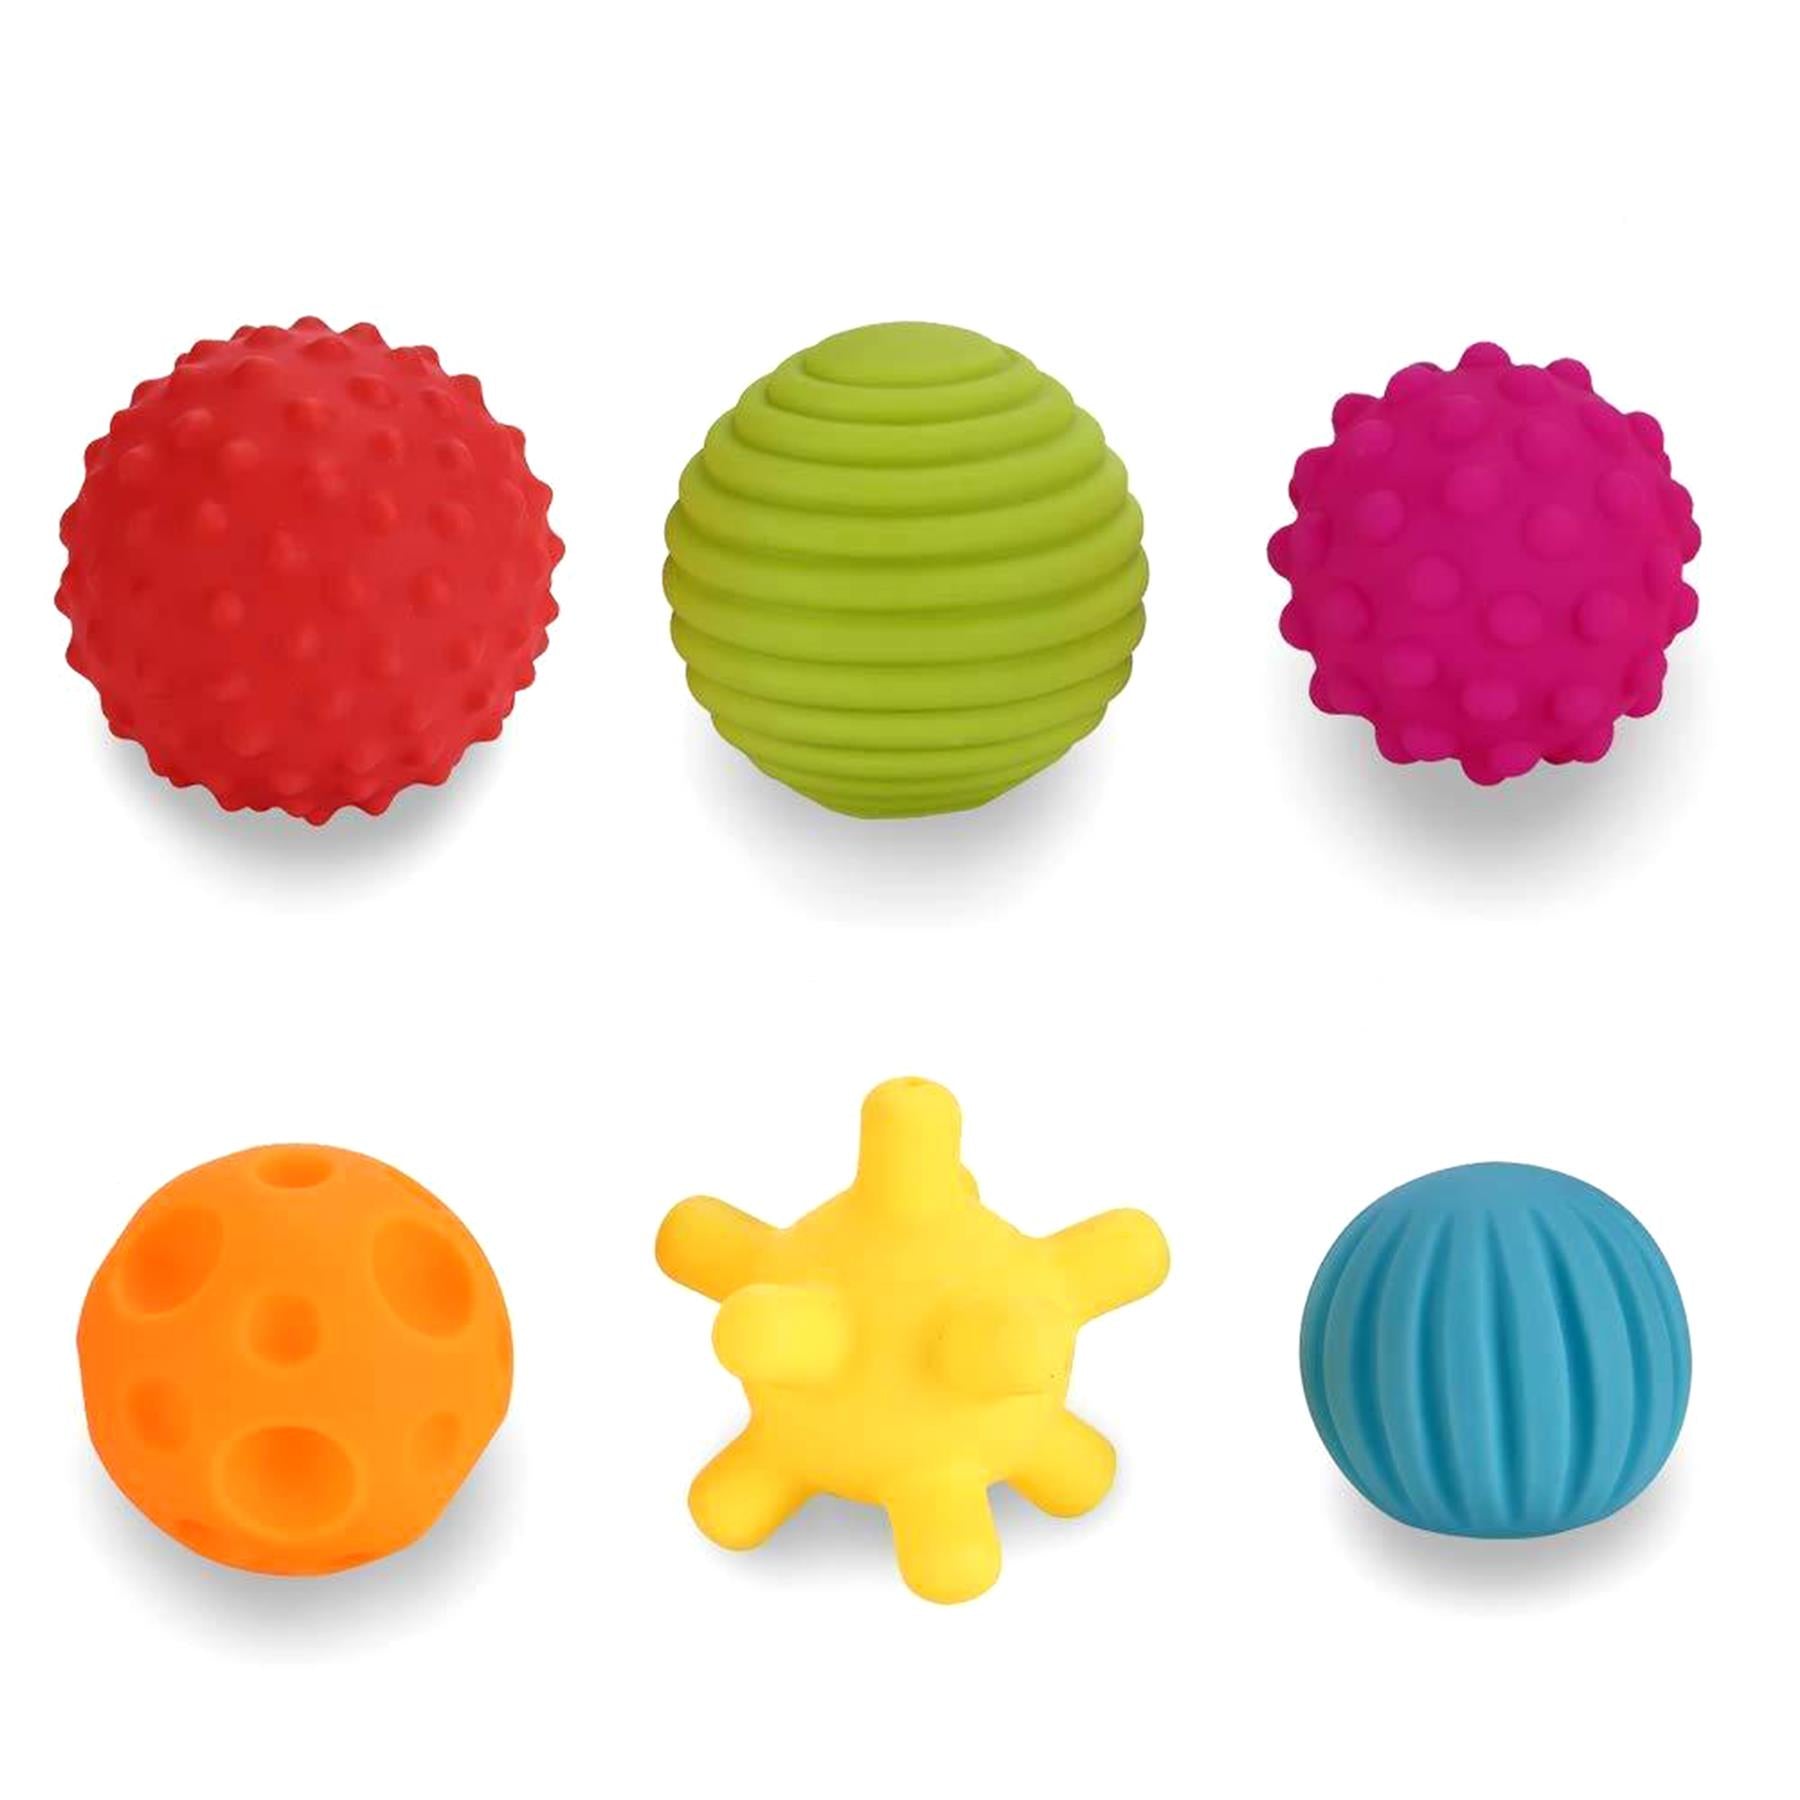 First Baby Ball Set by The Magic Toy Shop - The Magic Toy Shop